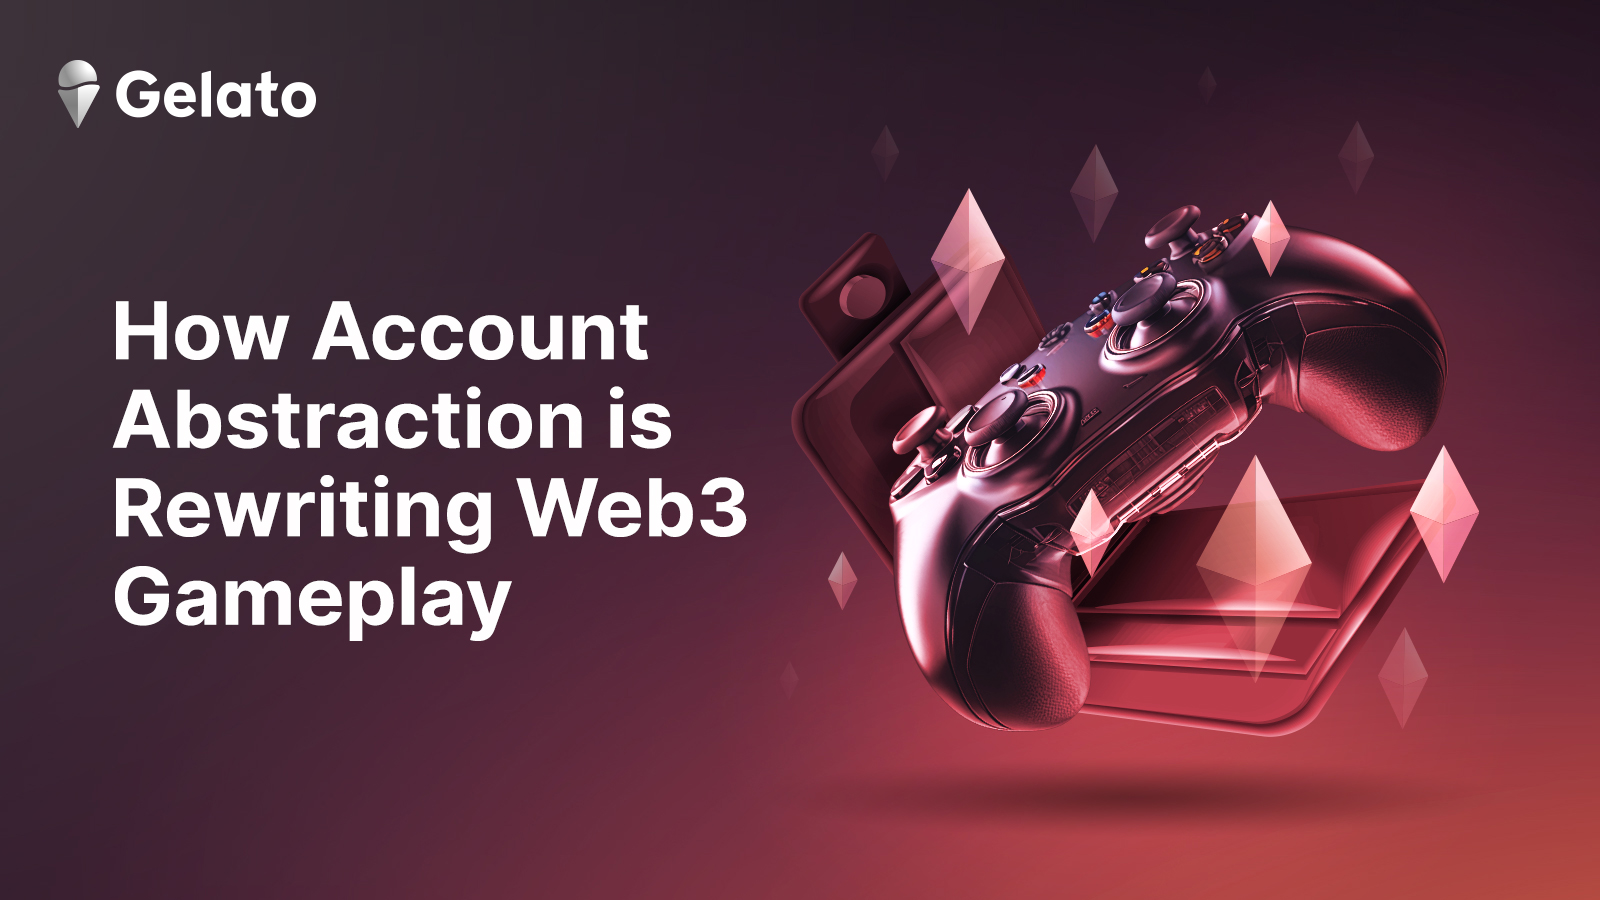 How Account Abstraction is Rewriting Web3 Gameplay